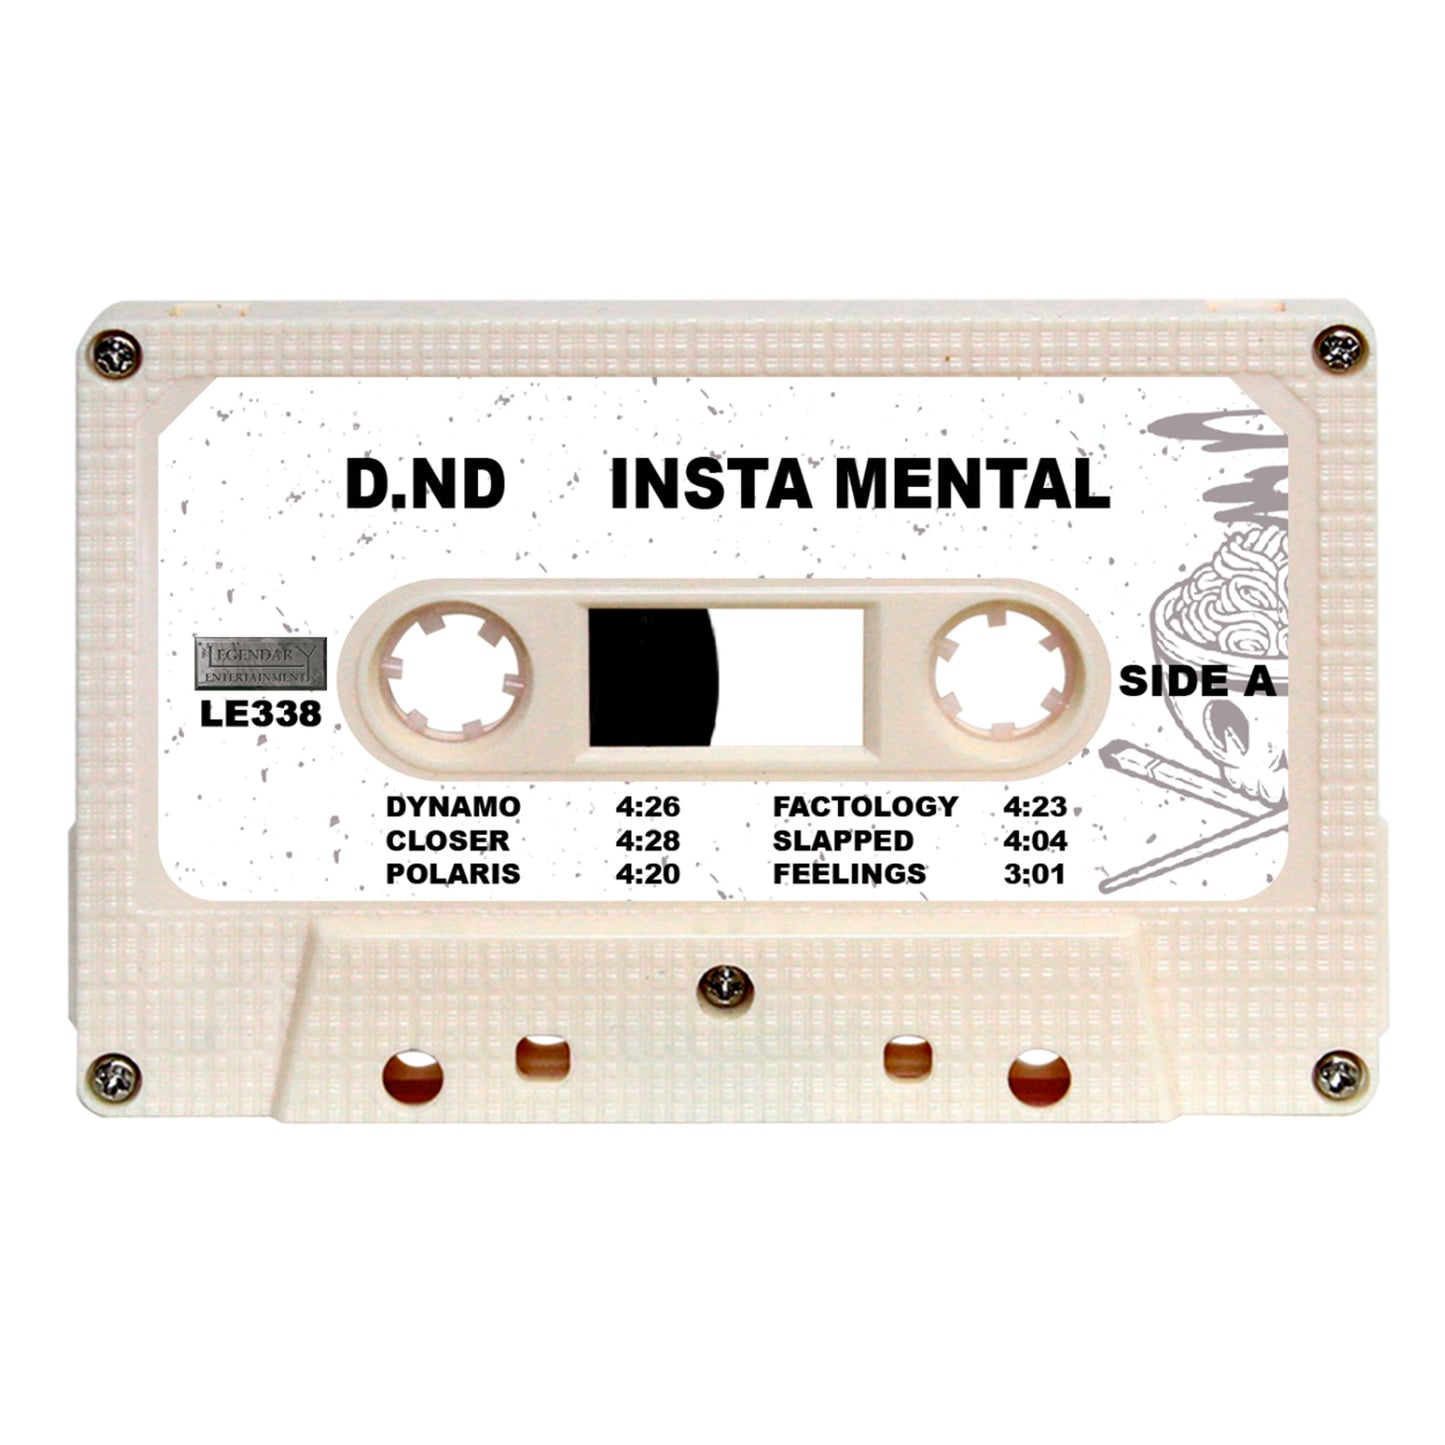 D.nd - "Insta Mental" Limited Edition Cassette Tape